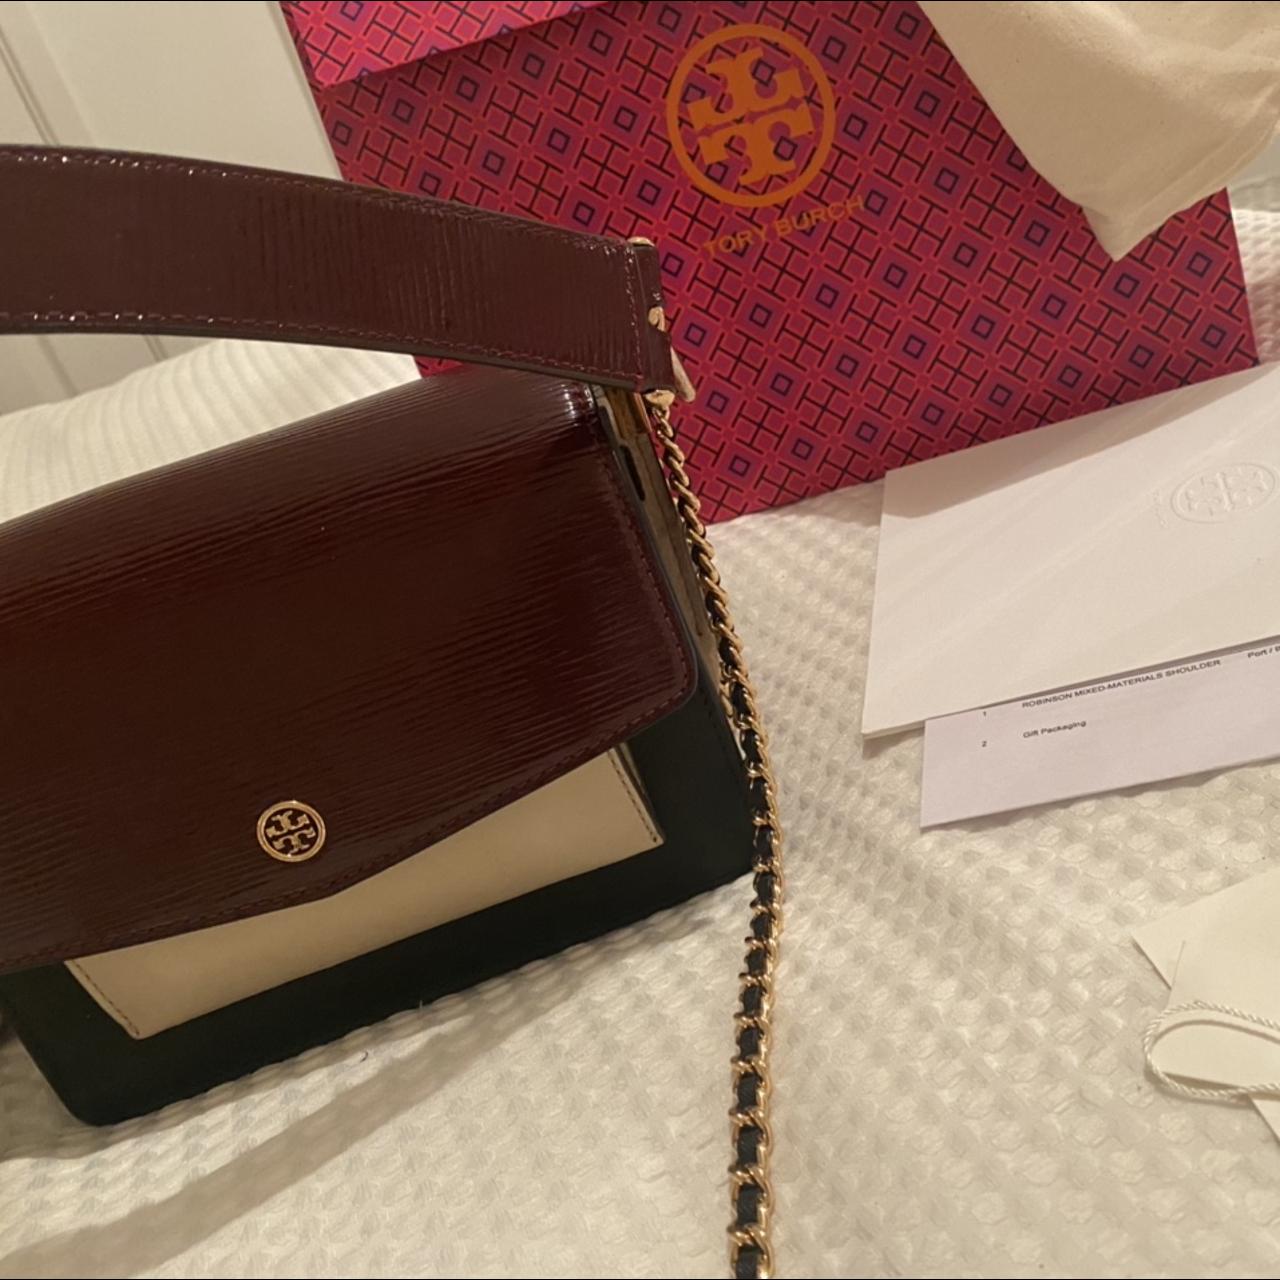 Tory Burch Robinson Colorblock Convertible Leather Shoulder Bag in Natural